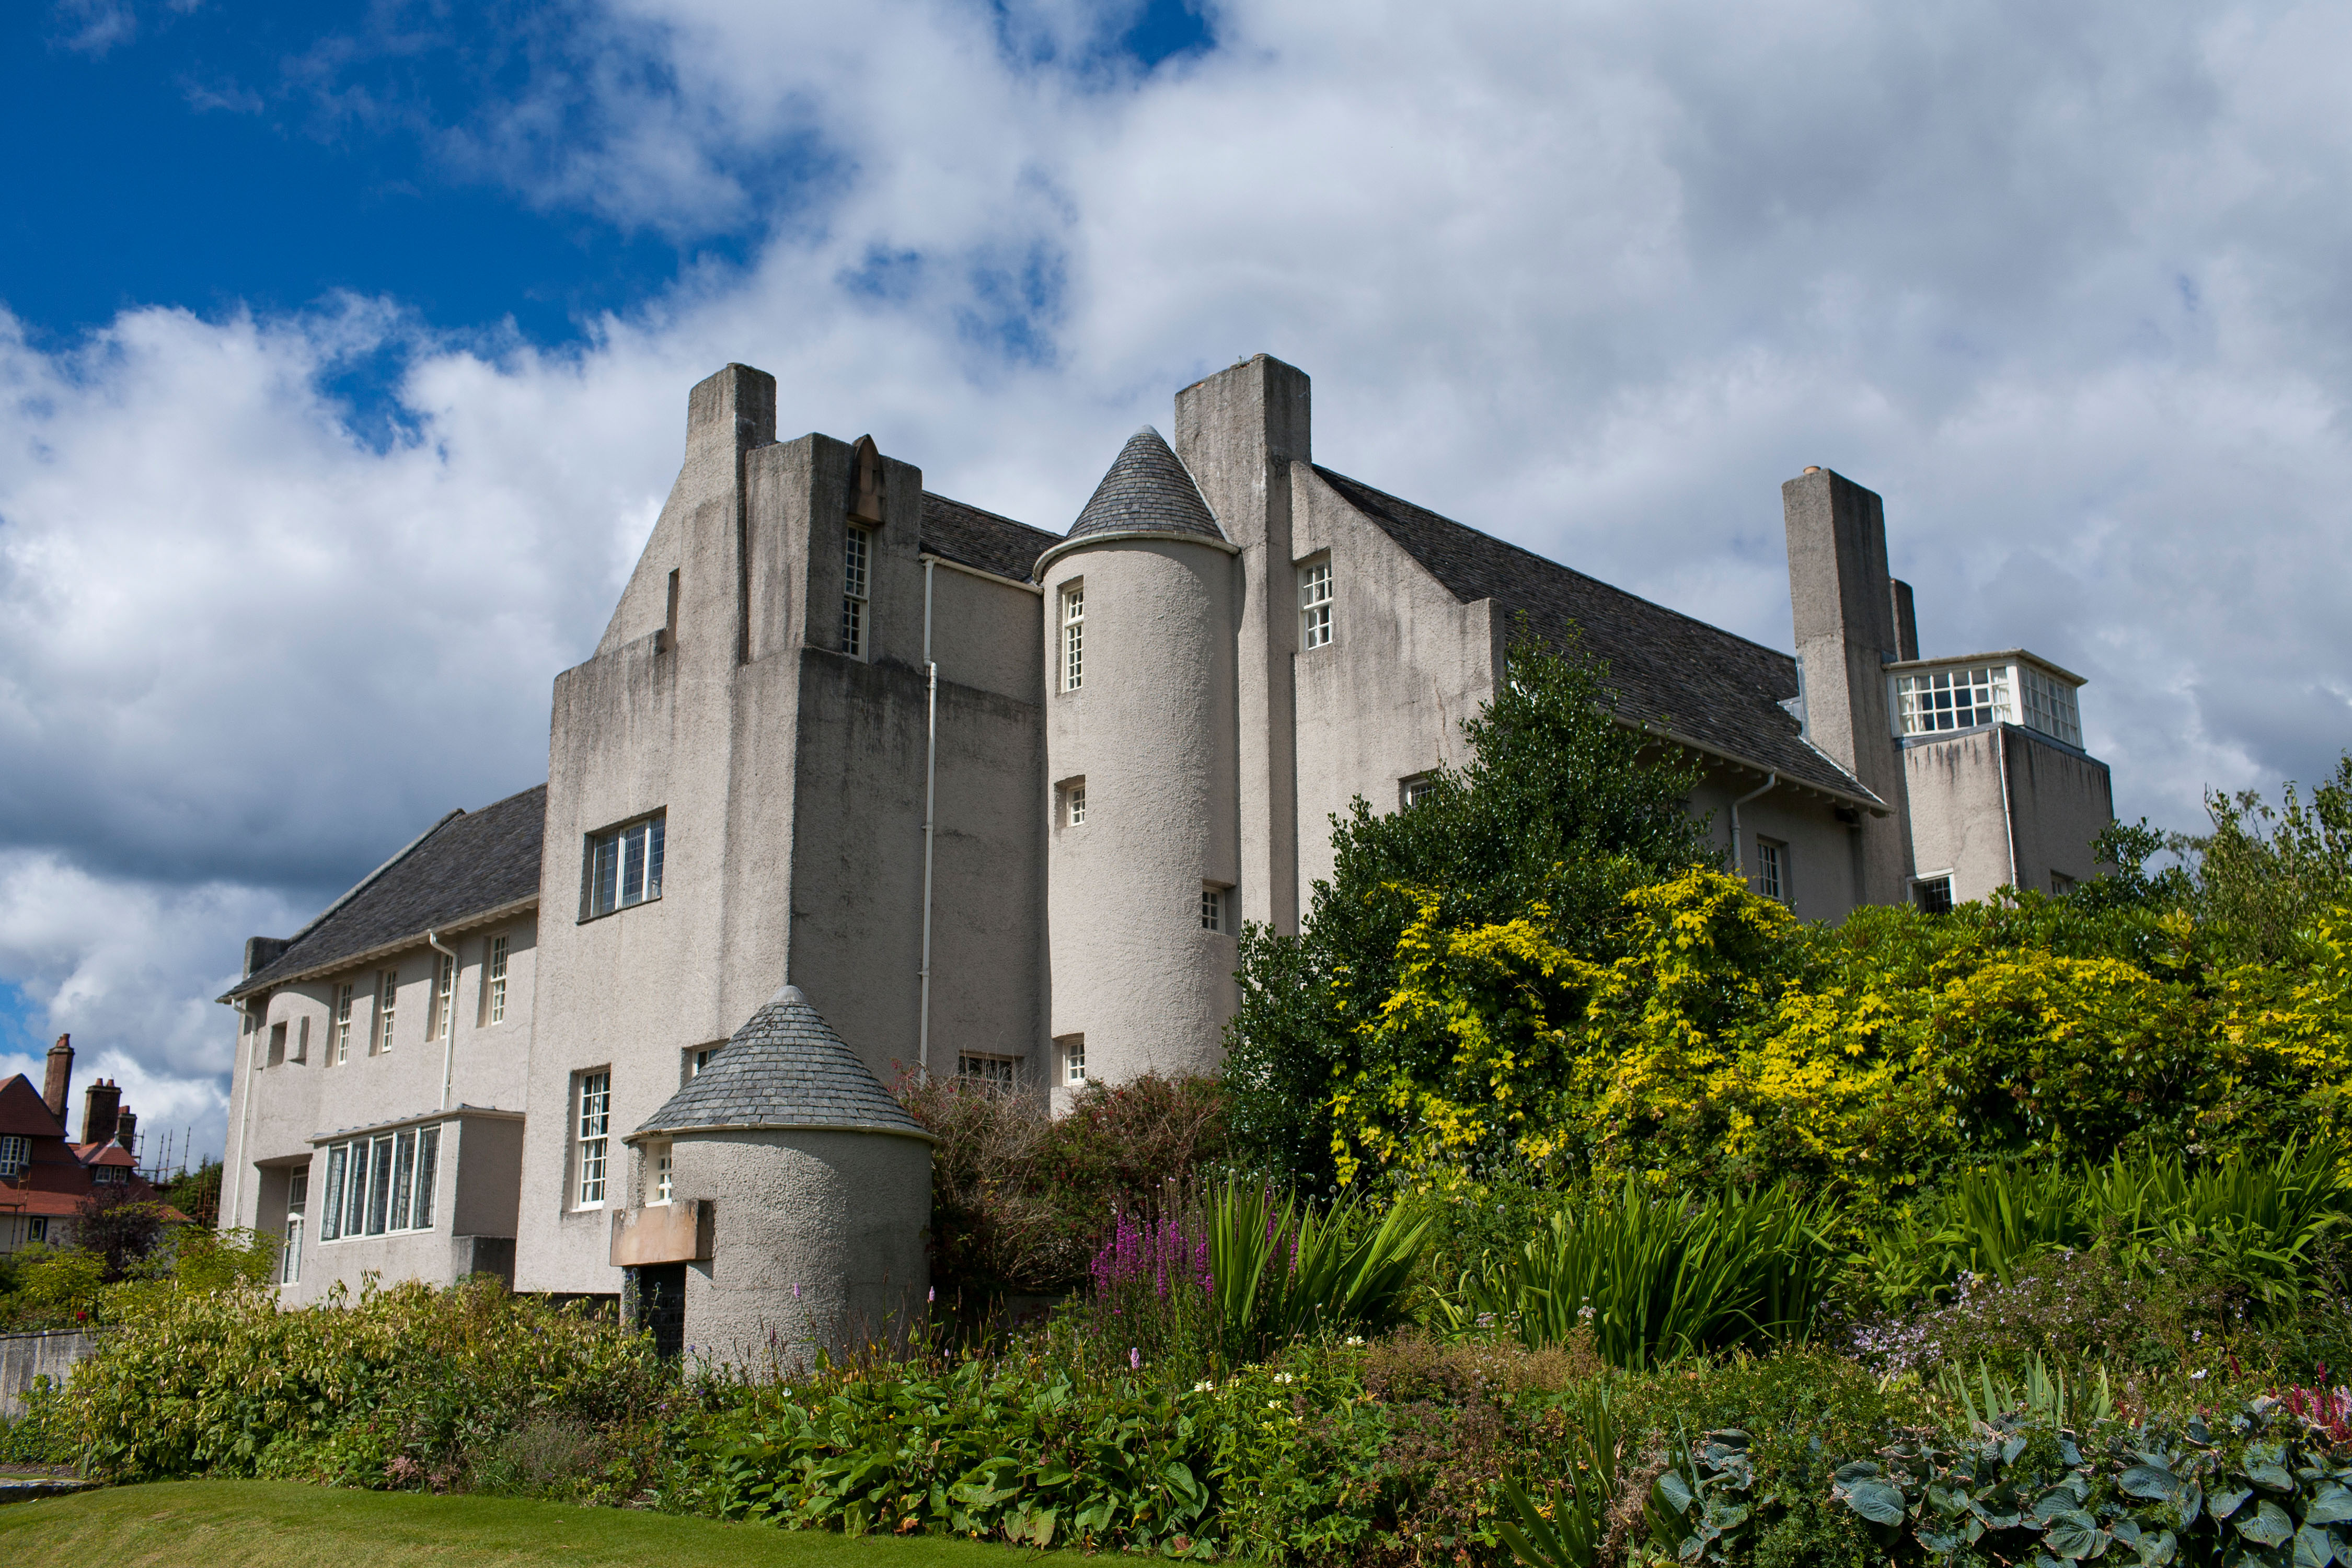 An exterior view of Hill house designed by Charles Rennie Mackintosh and built for Walter Blackie in Helensburgh, in Scotland